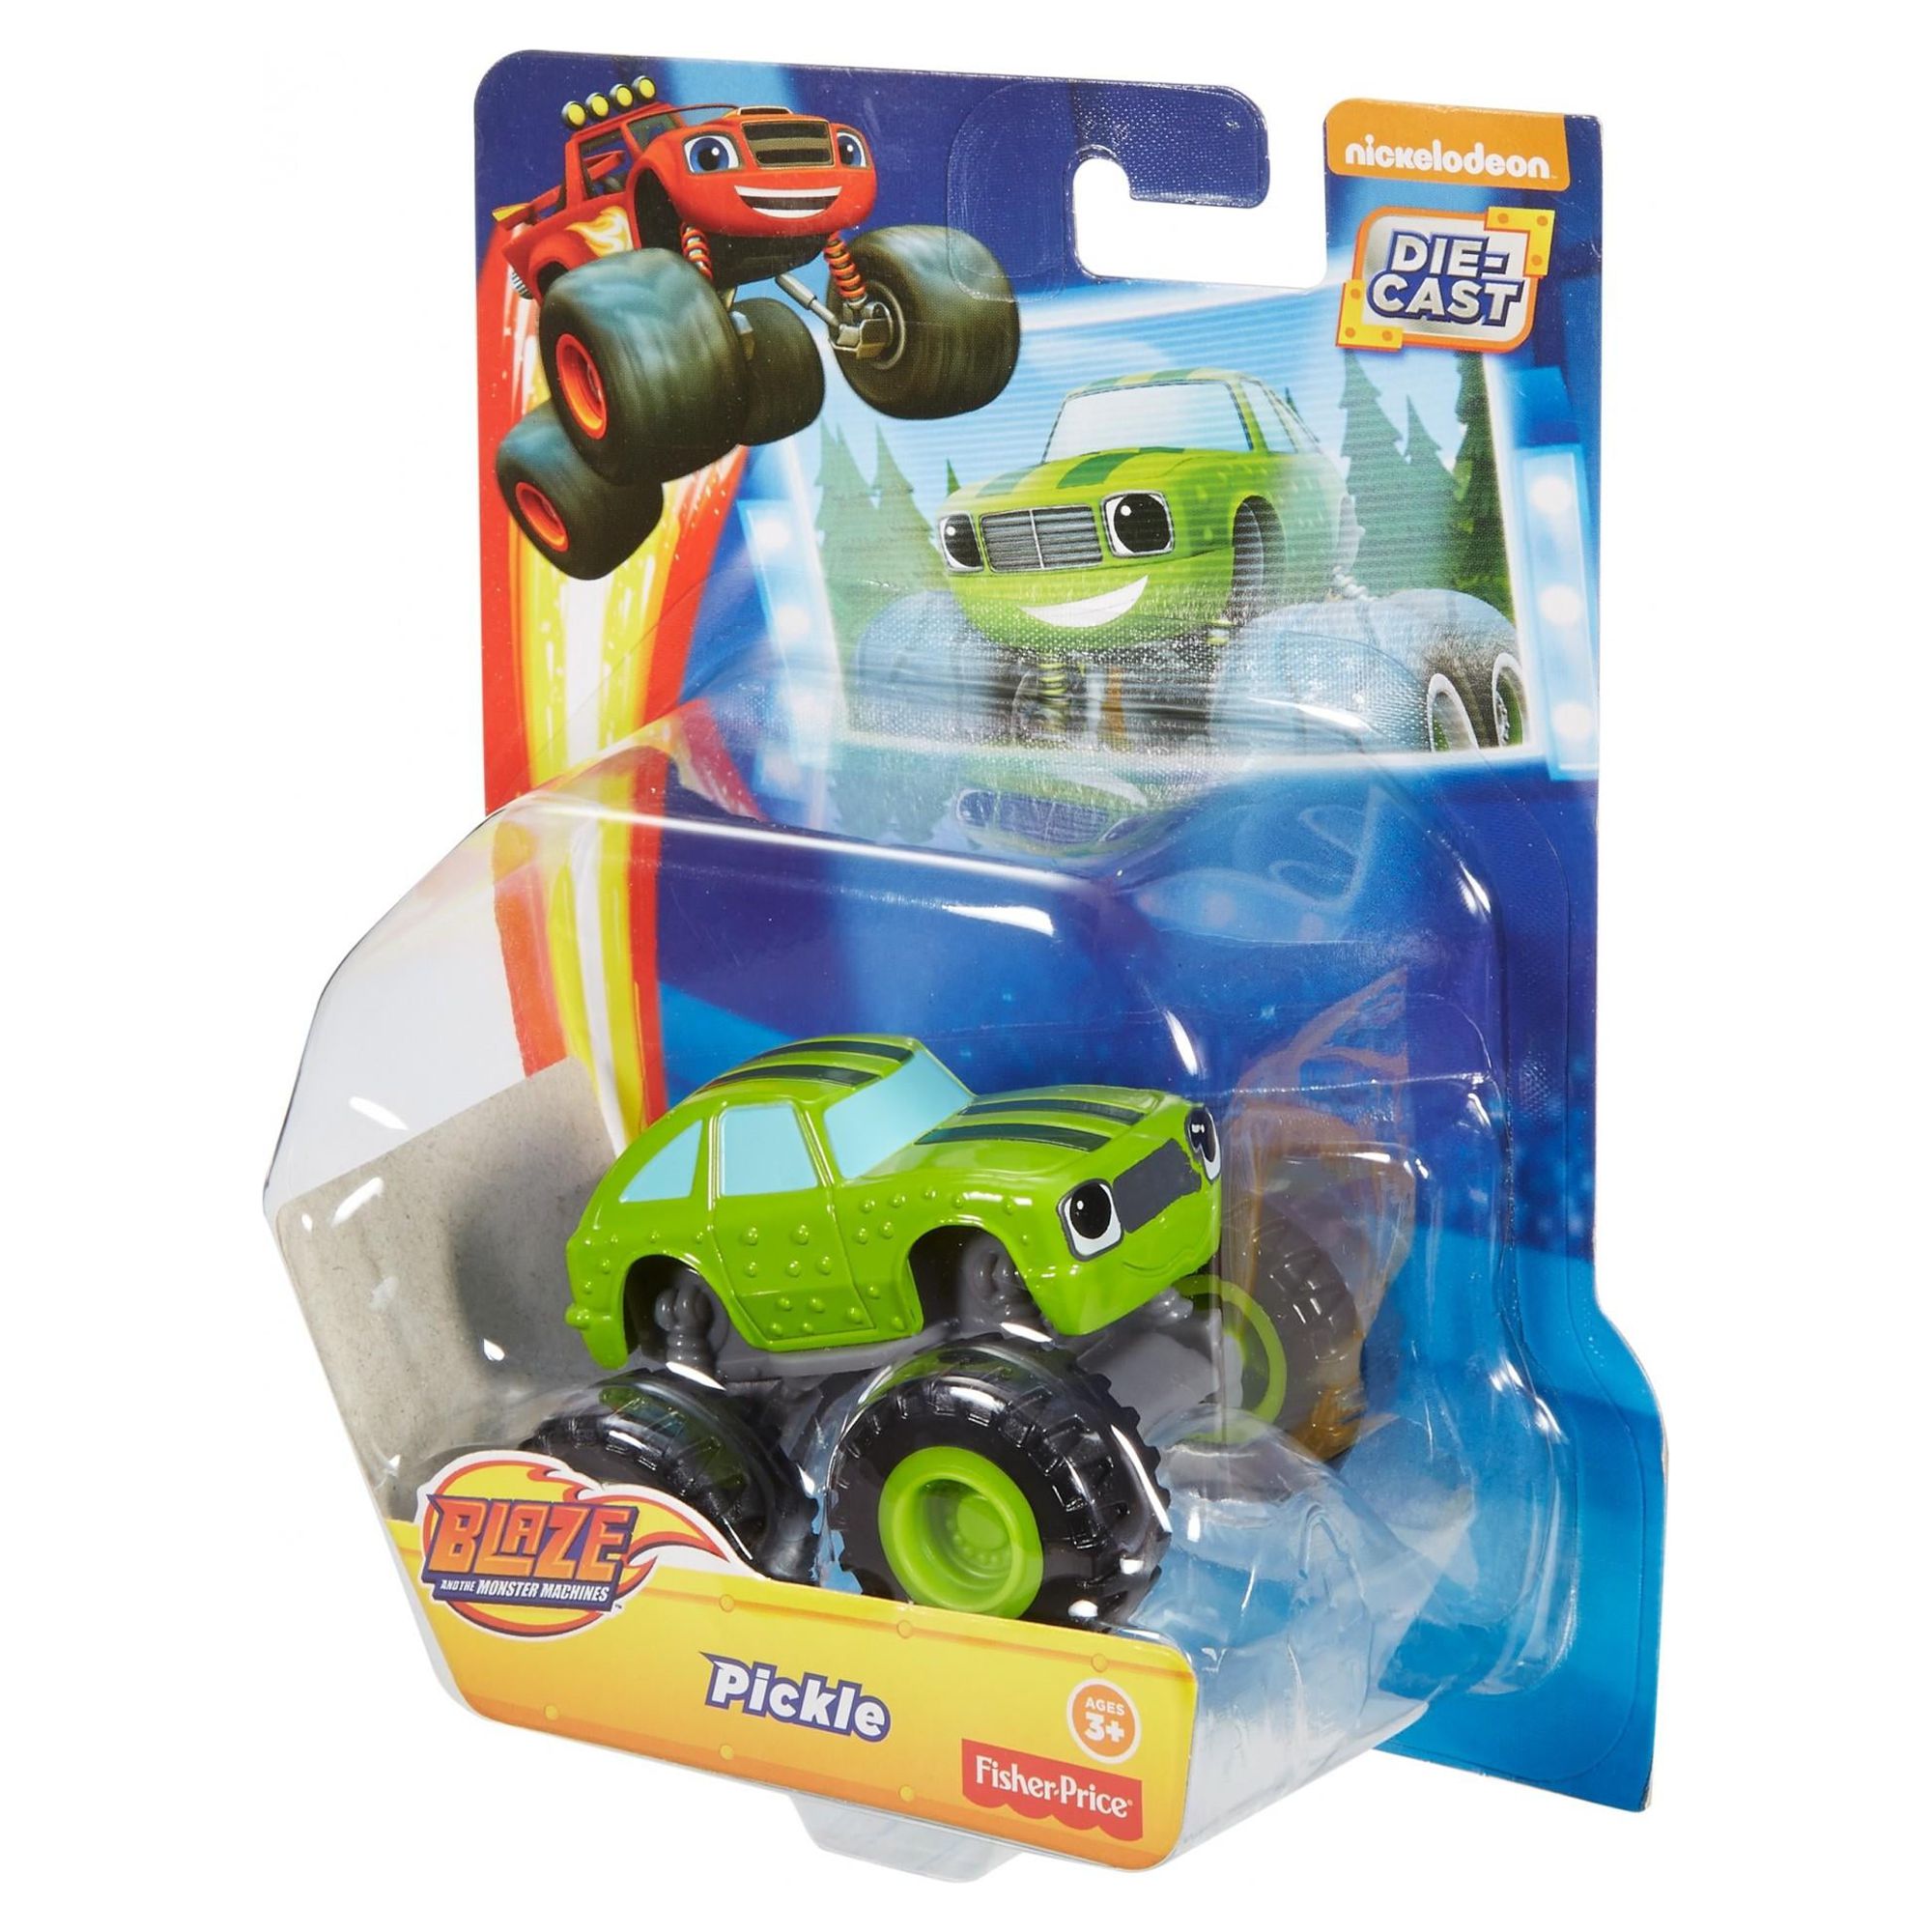 Nickelodeon Blaze and the Monster Machines Pickle Vehicle - image 3 of 3